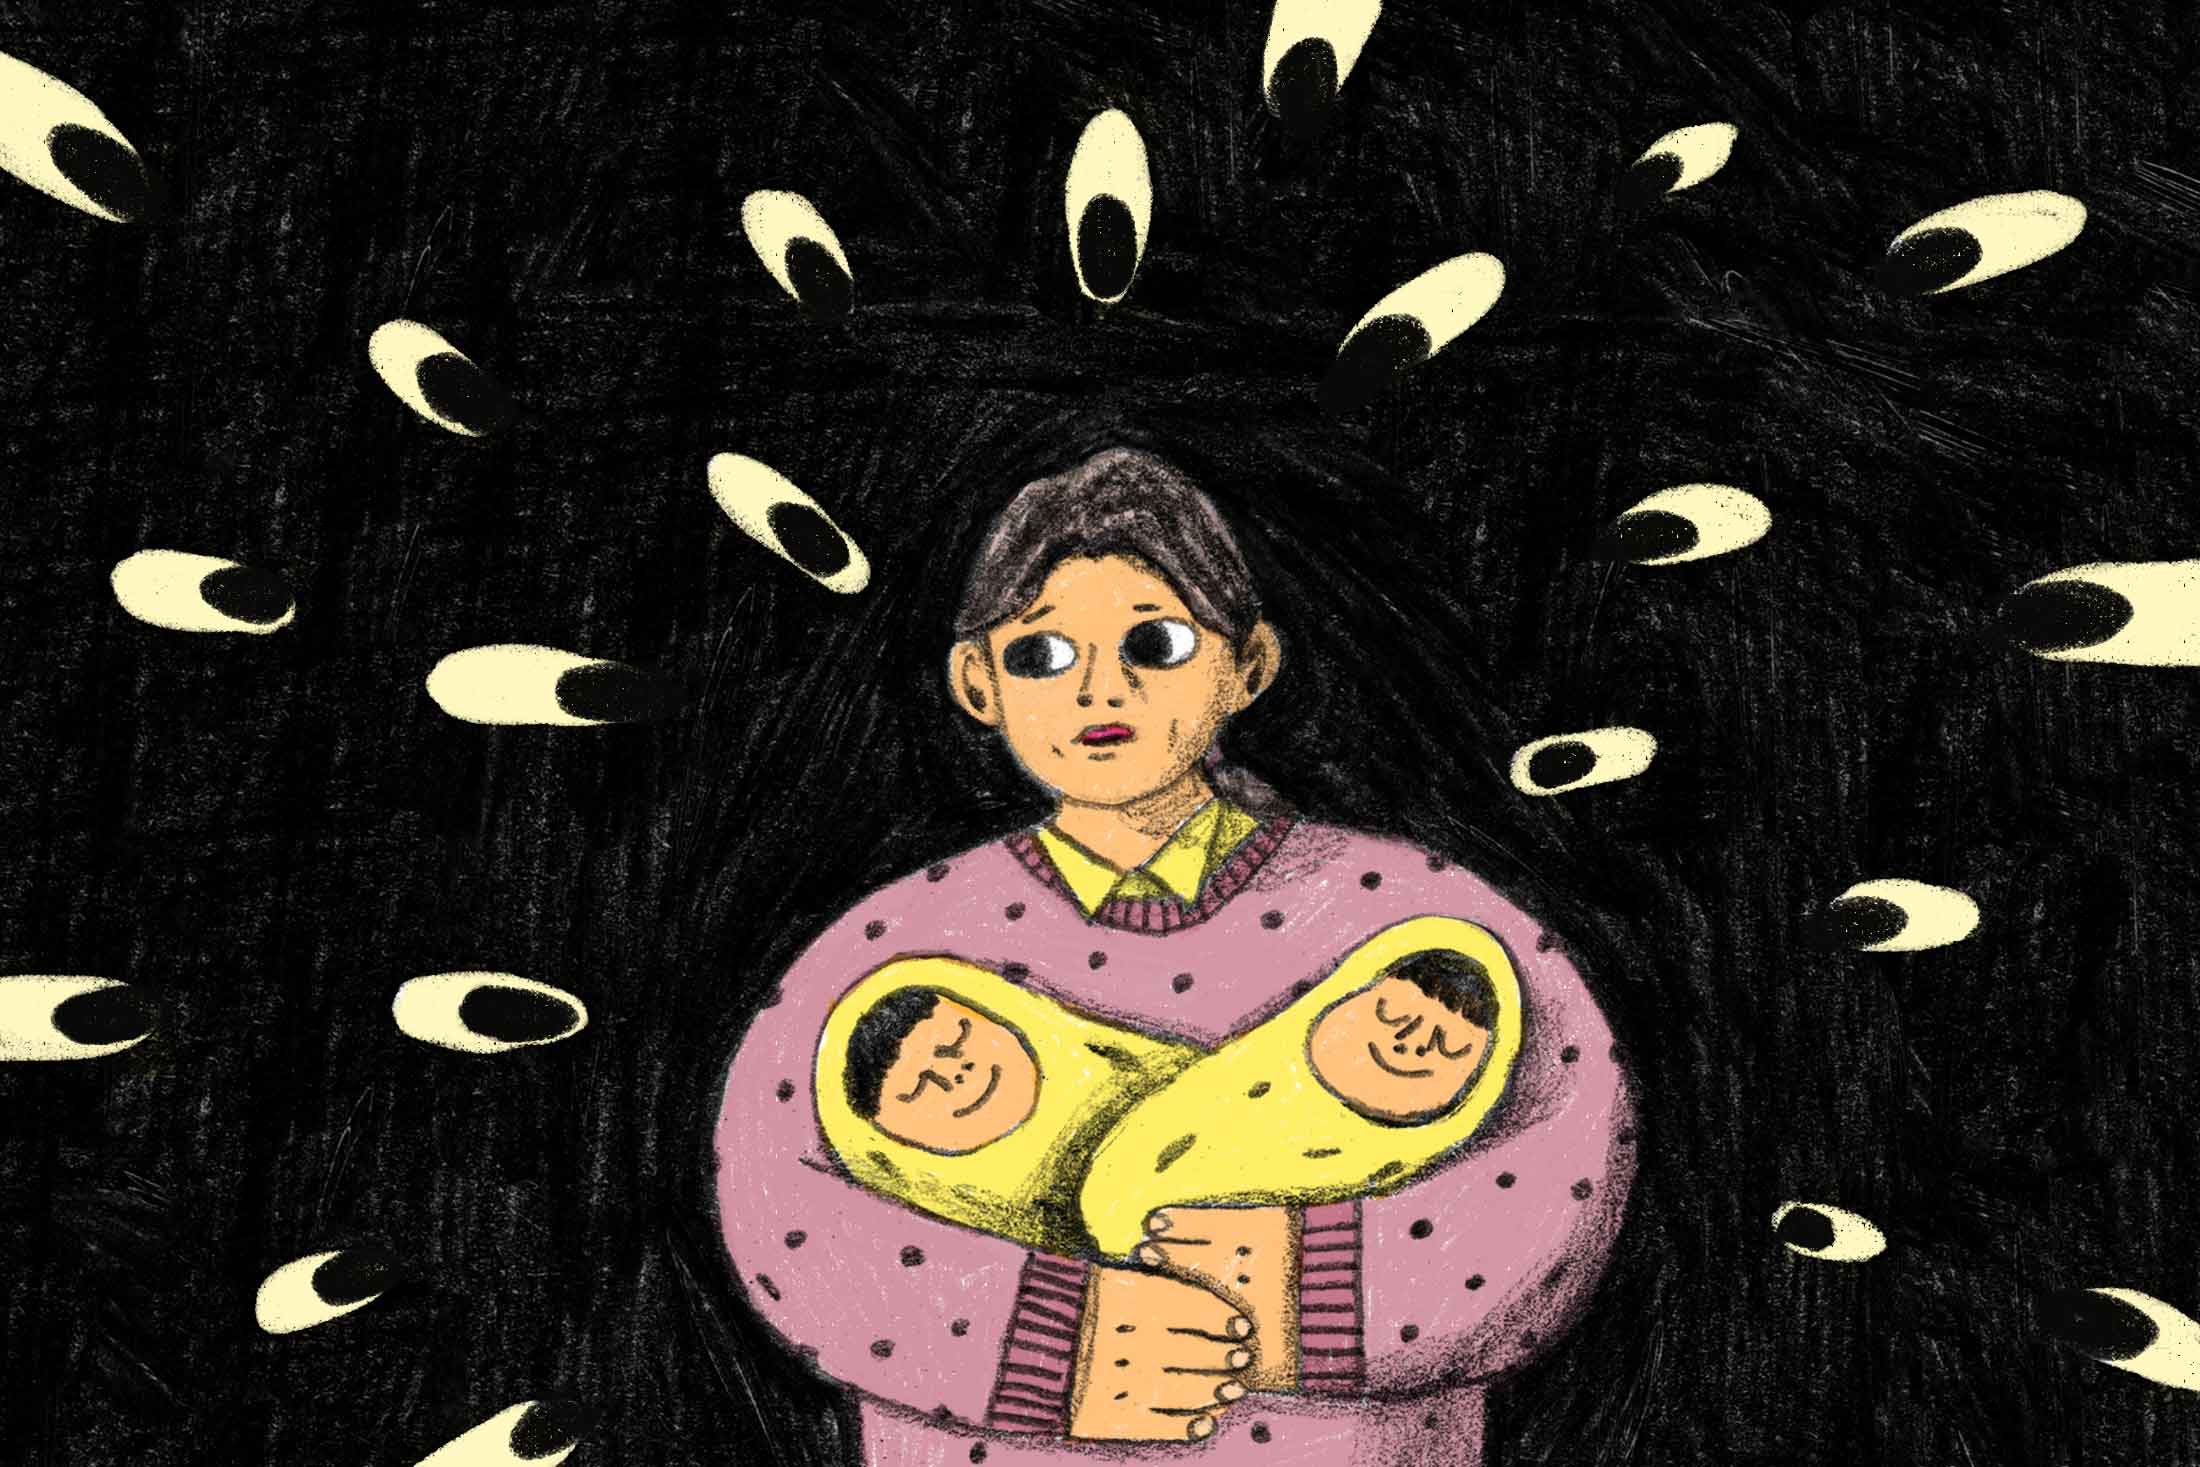 A mother holds her twin infants as several eyes peer through the darkness at her.